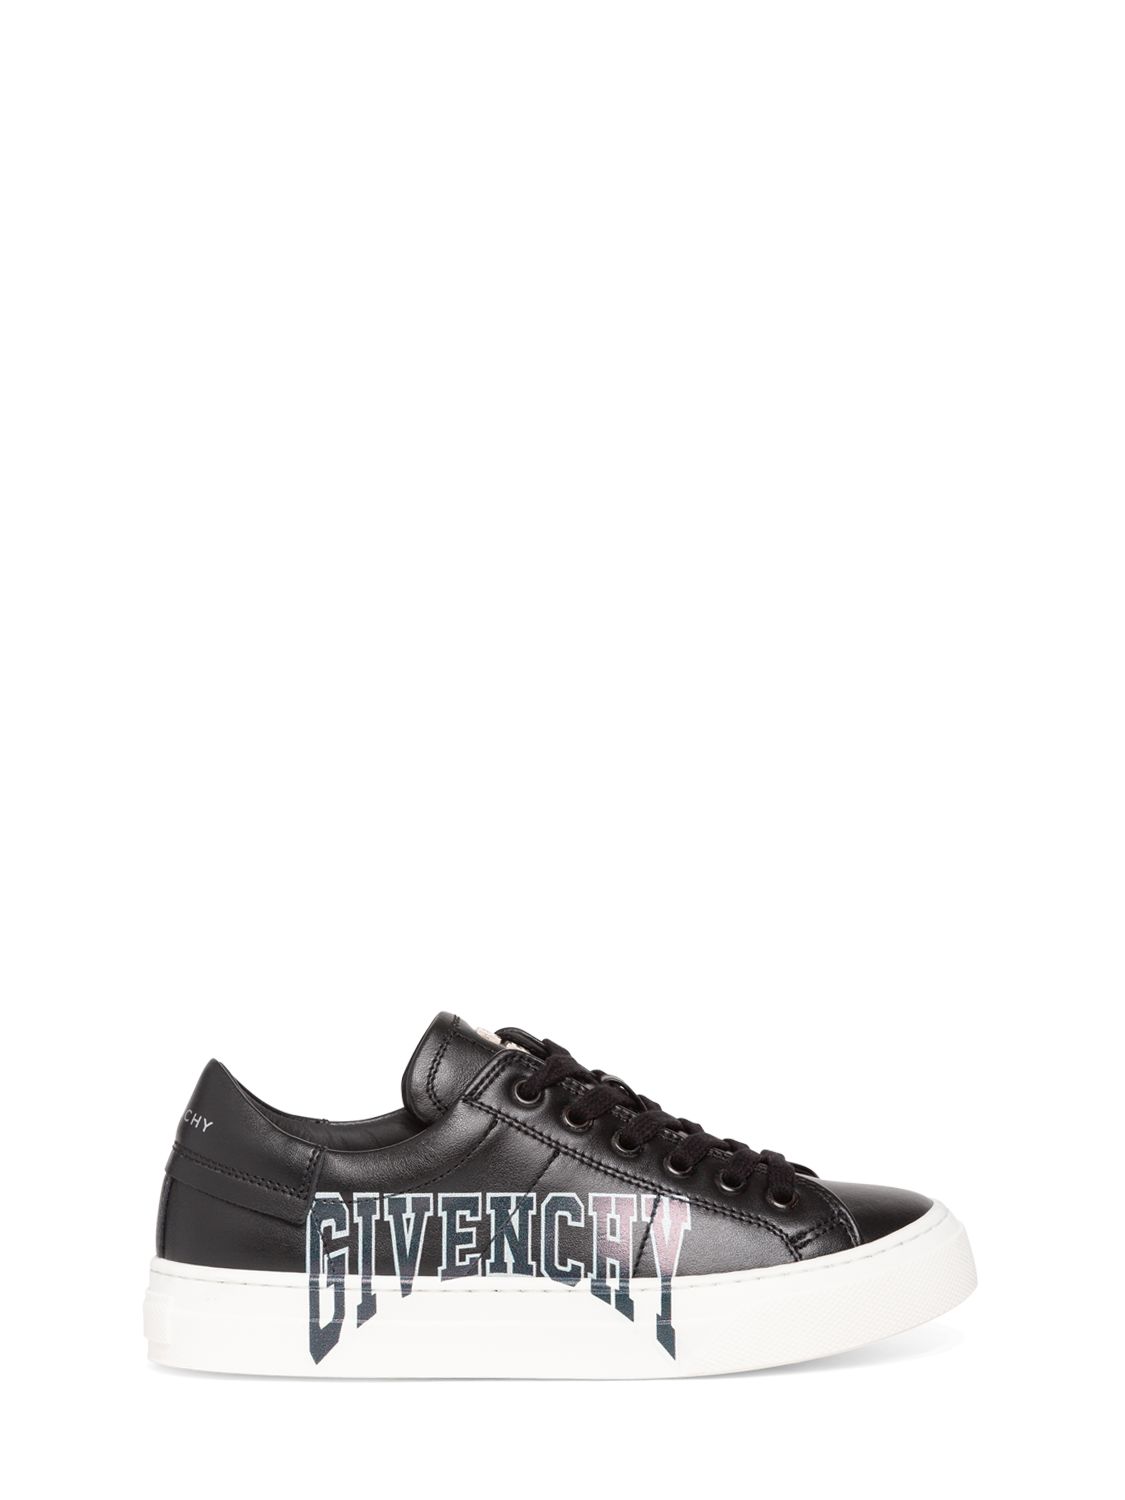 Givenchy Logo Print Leather Lace-up Sneakers In Black